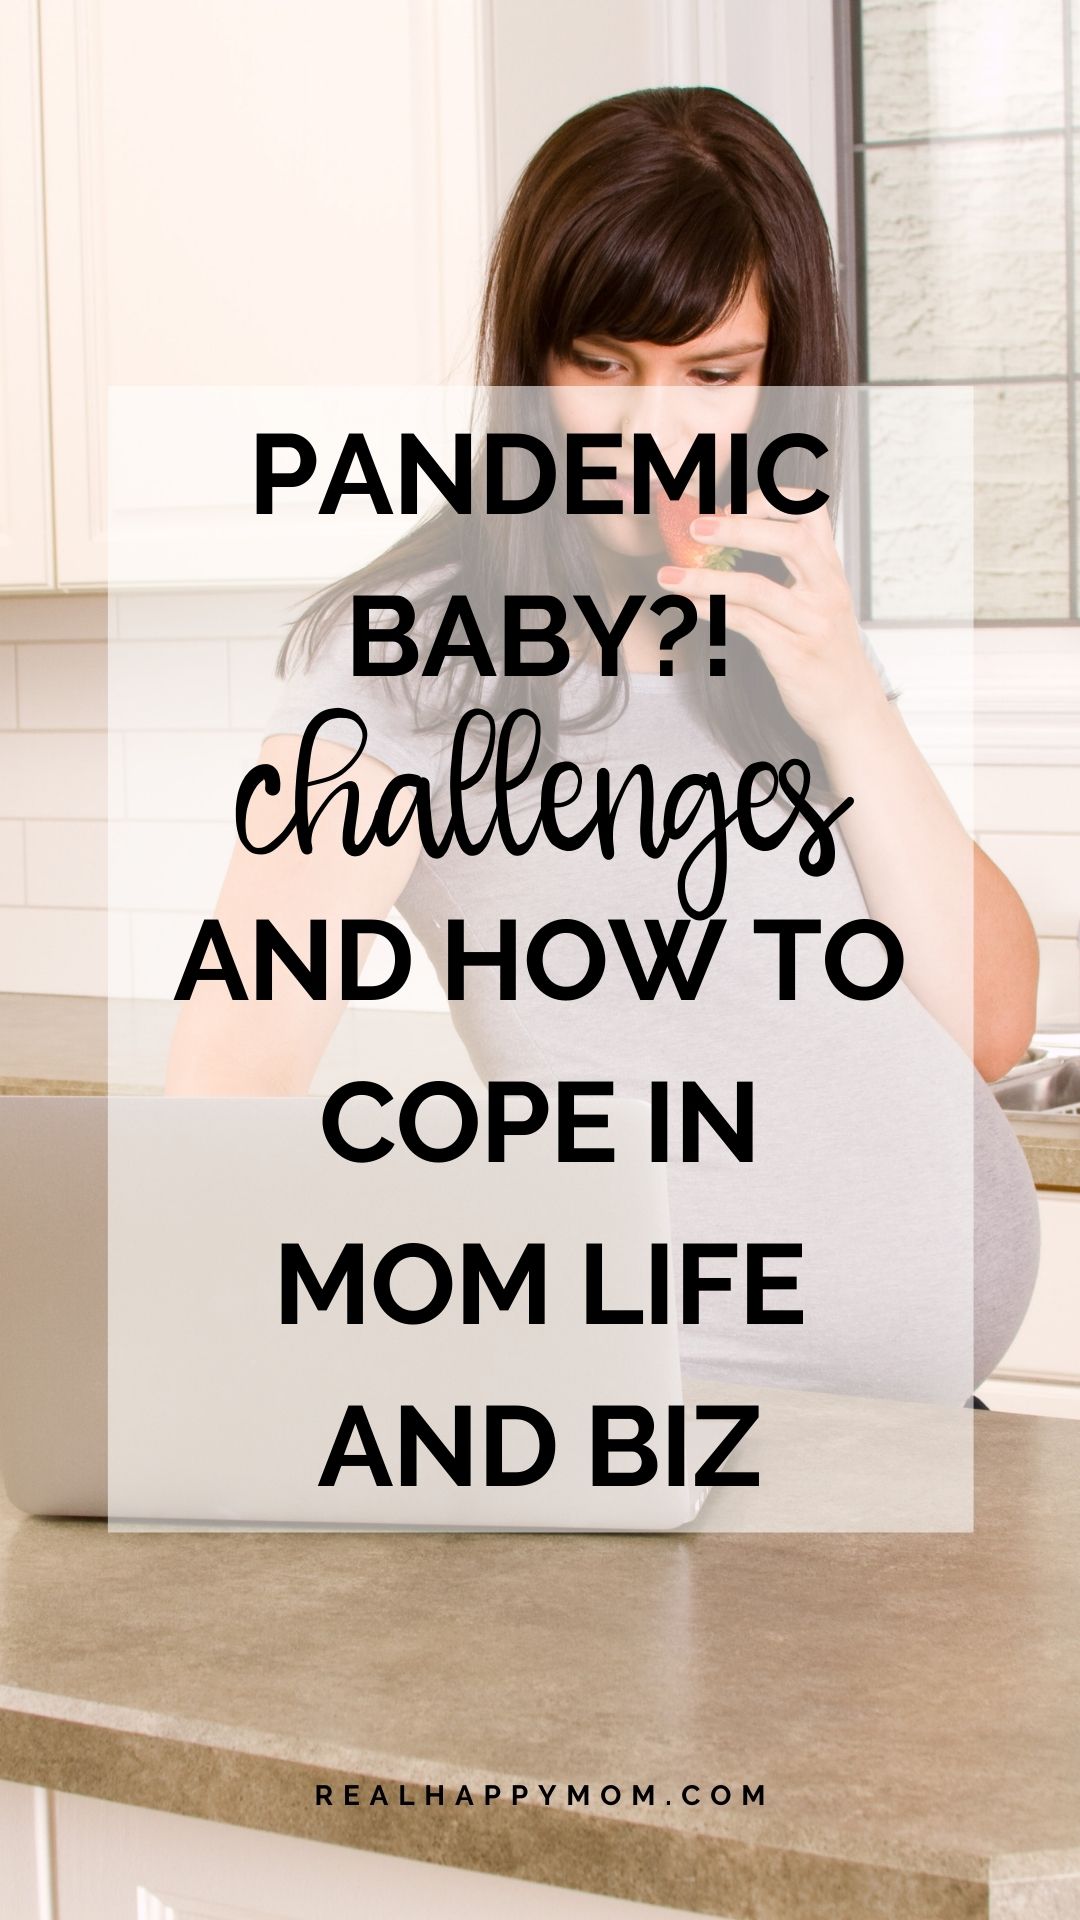 Pandemic Baby?! Challenges and How to Cope in Mom Life and Biz